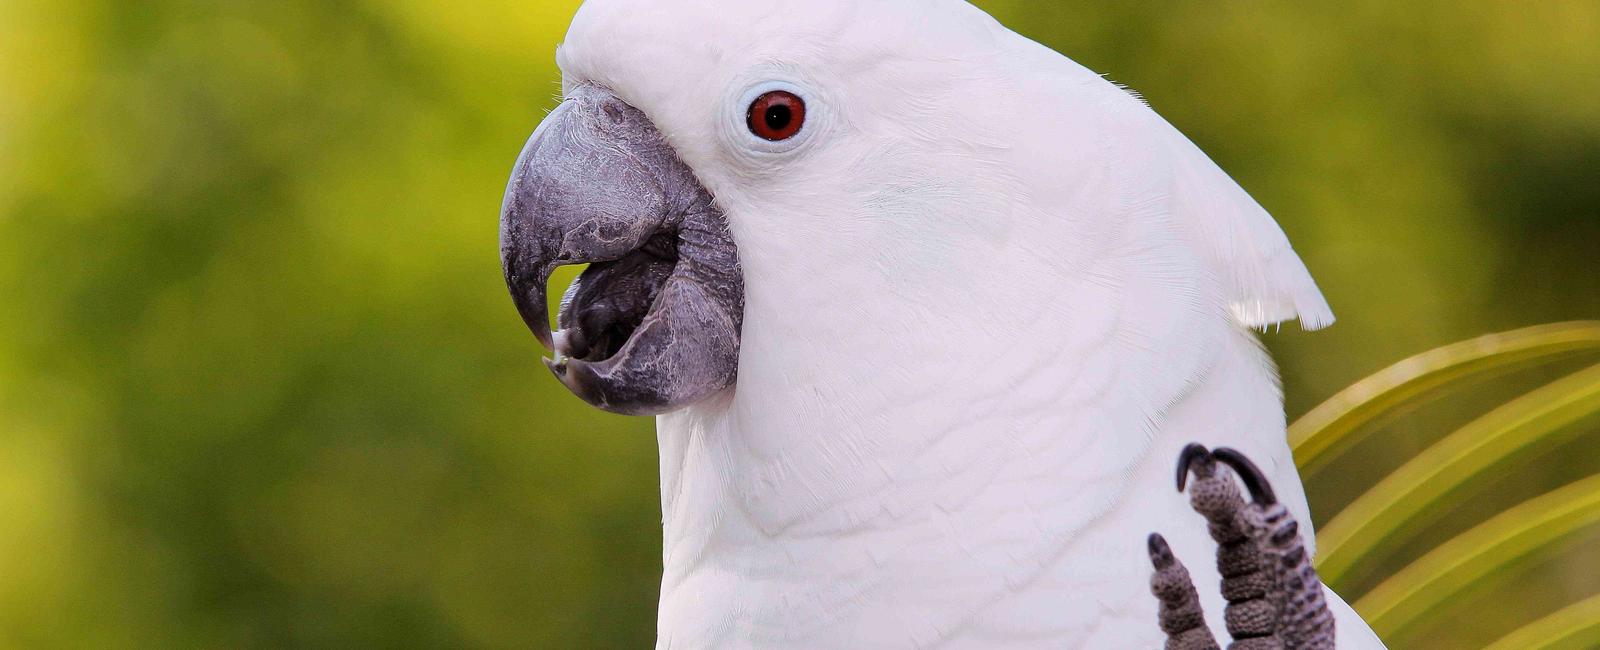 Amazonian parrots and cockatoos can live for over 75 years outliving their owners it s because they have fewer predators and gather in groups in the wild